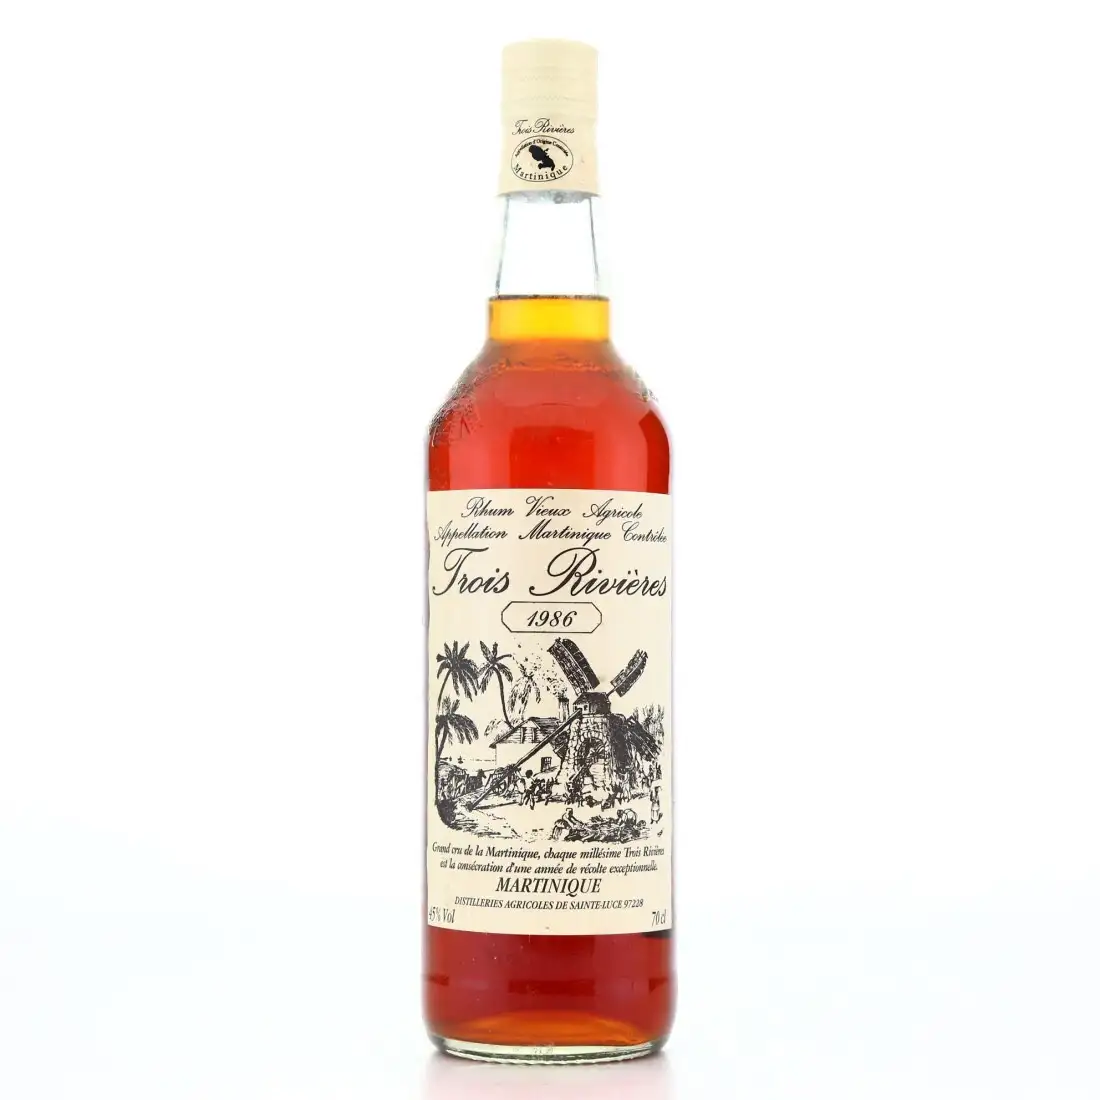 Image of the front of the bottle of the rum 1986